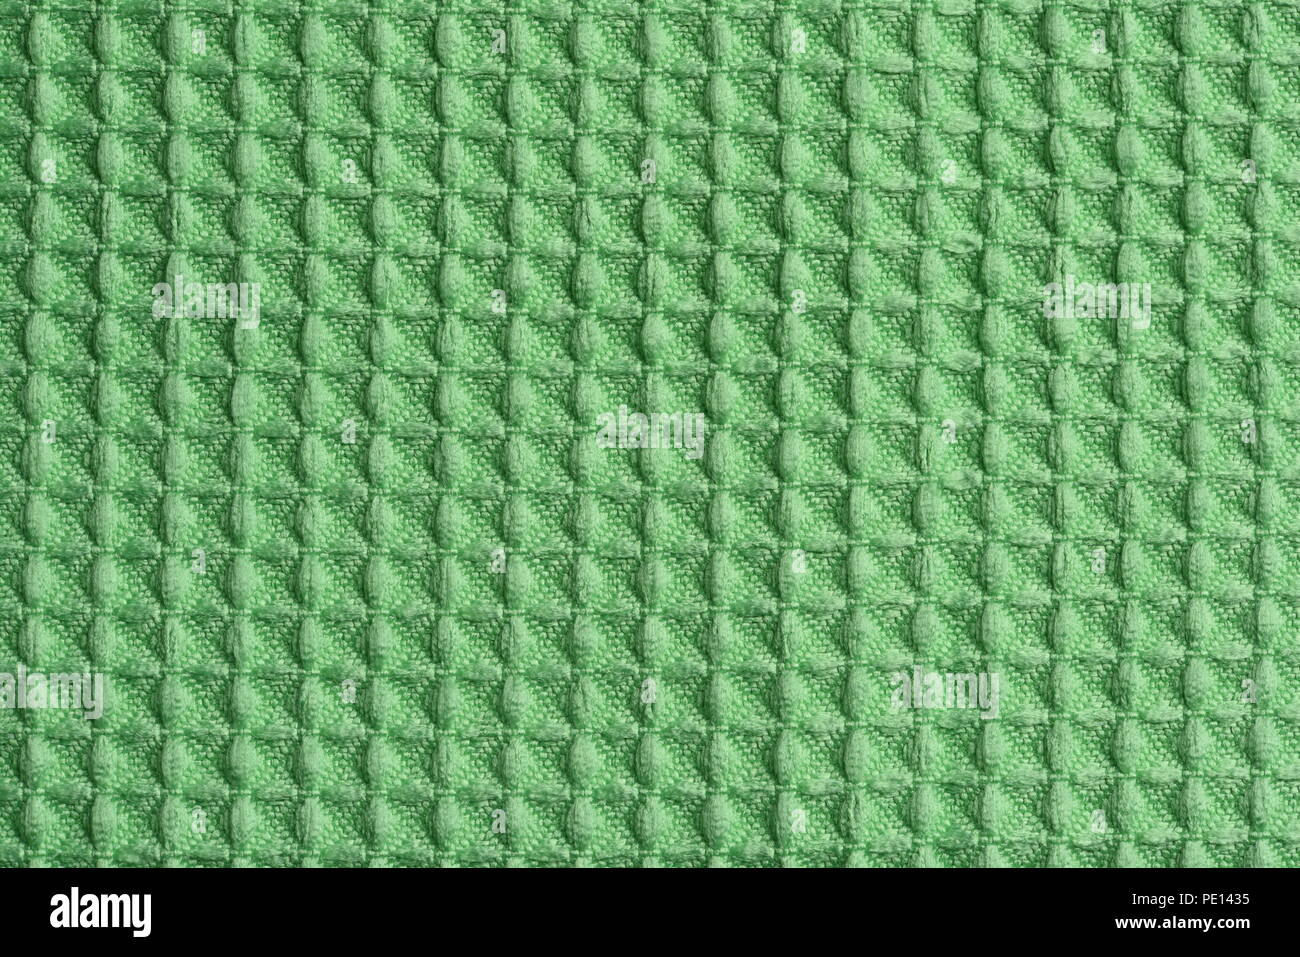 Kitchen cloth texture or background Stock Photo